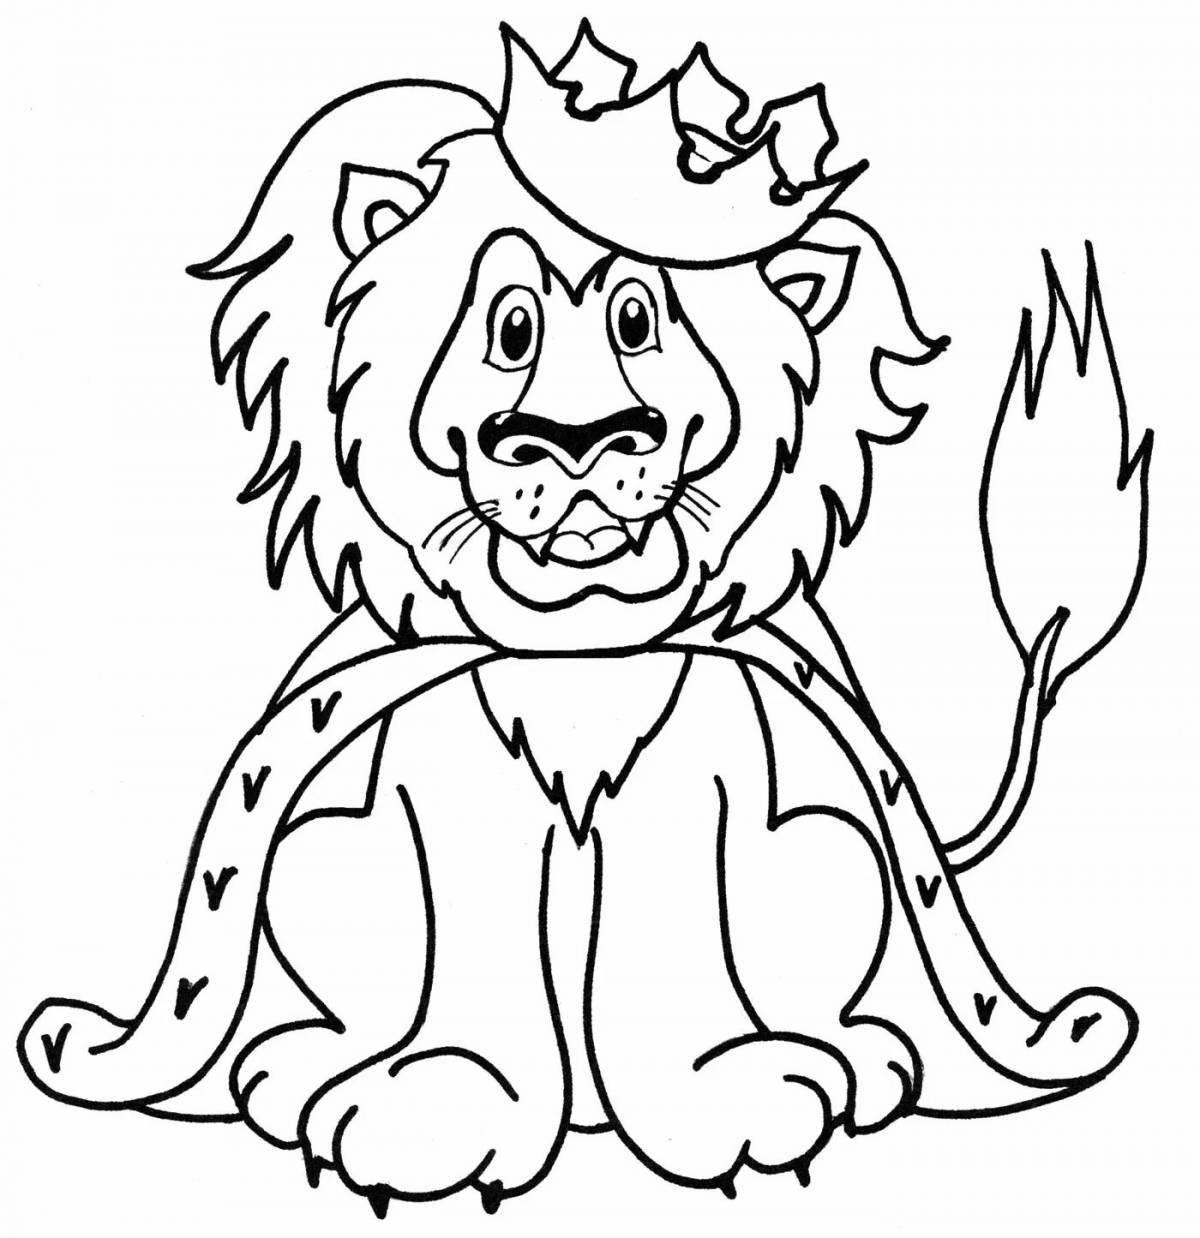 Dazzling drawing of a lion